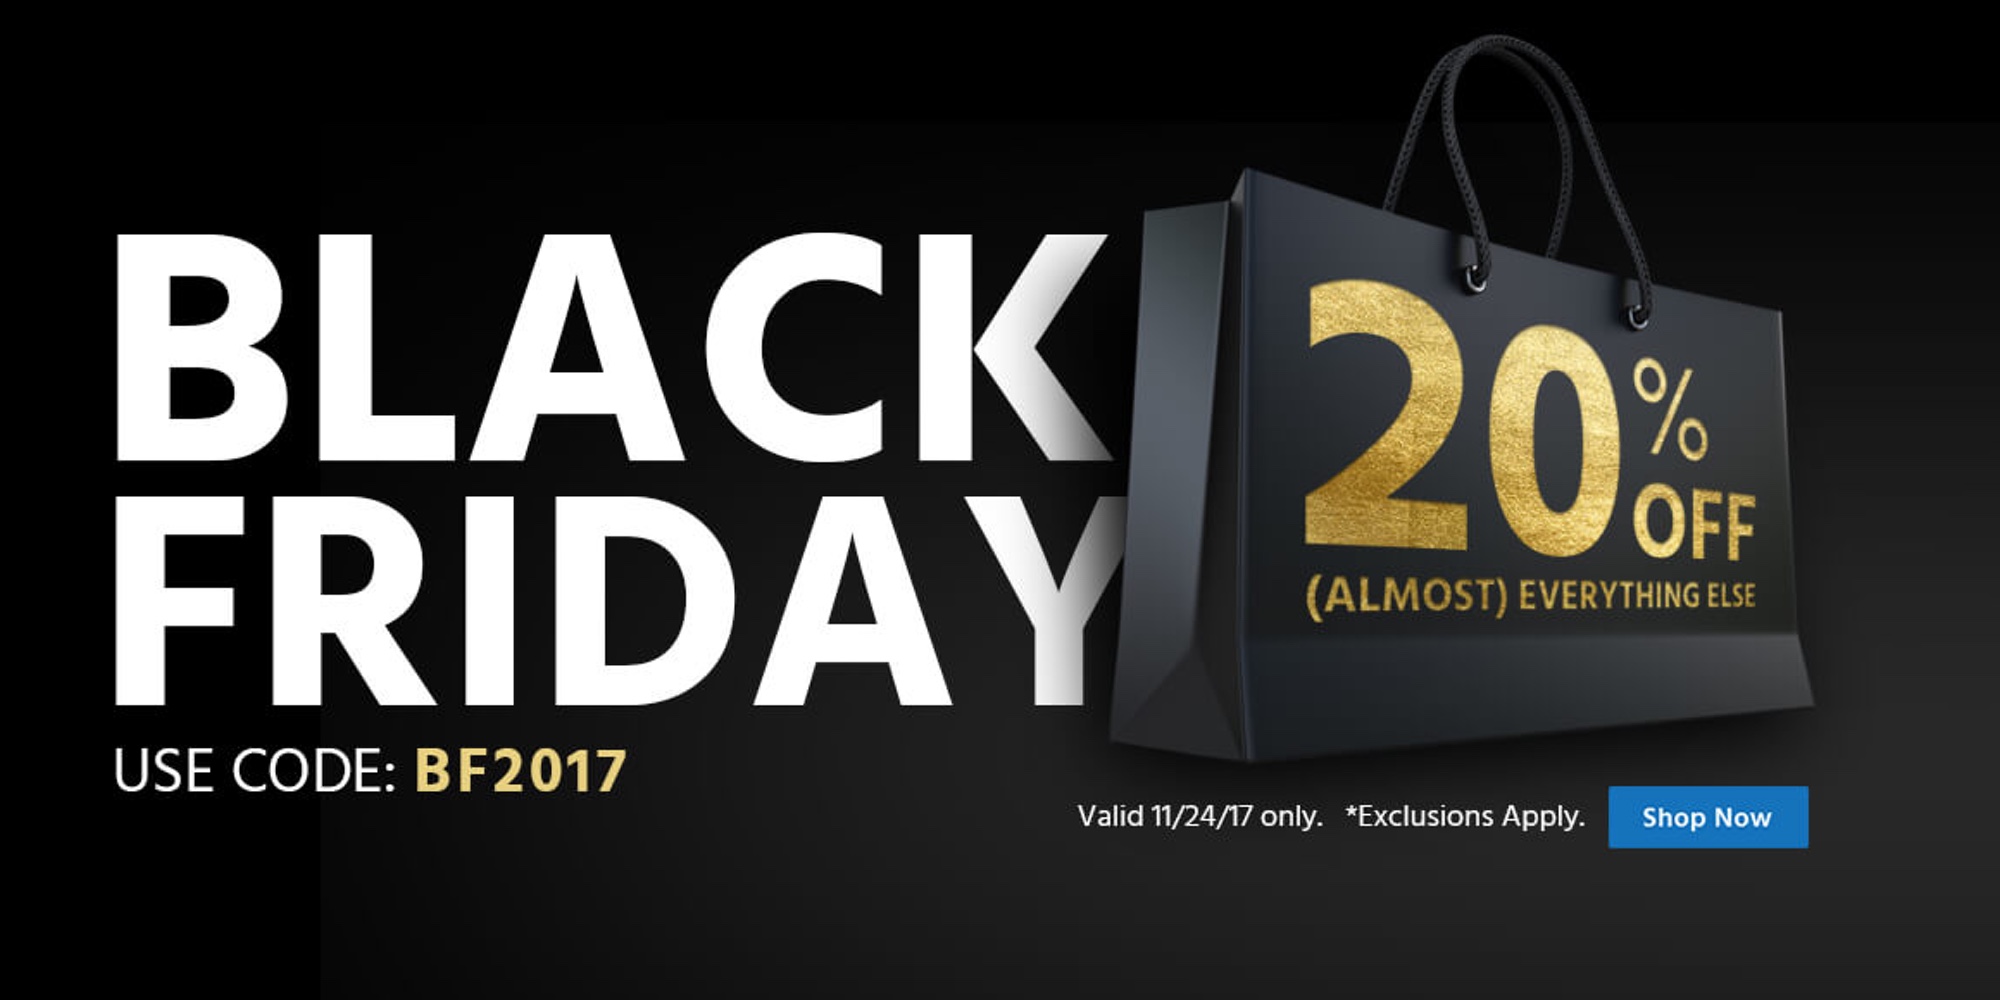 Monoprice Black Friday coupon code takes 20% off sitewide: cables - Will Pelican Have A Black Friday Deal